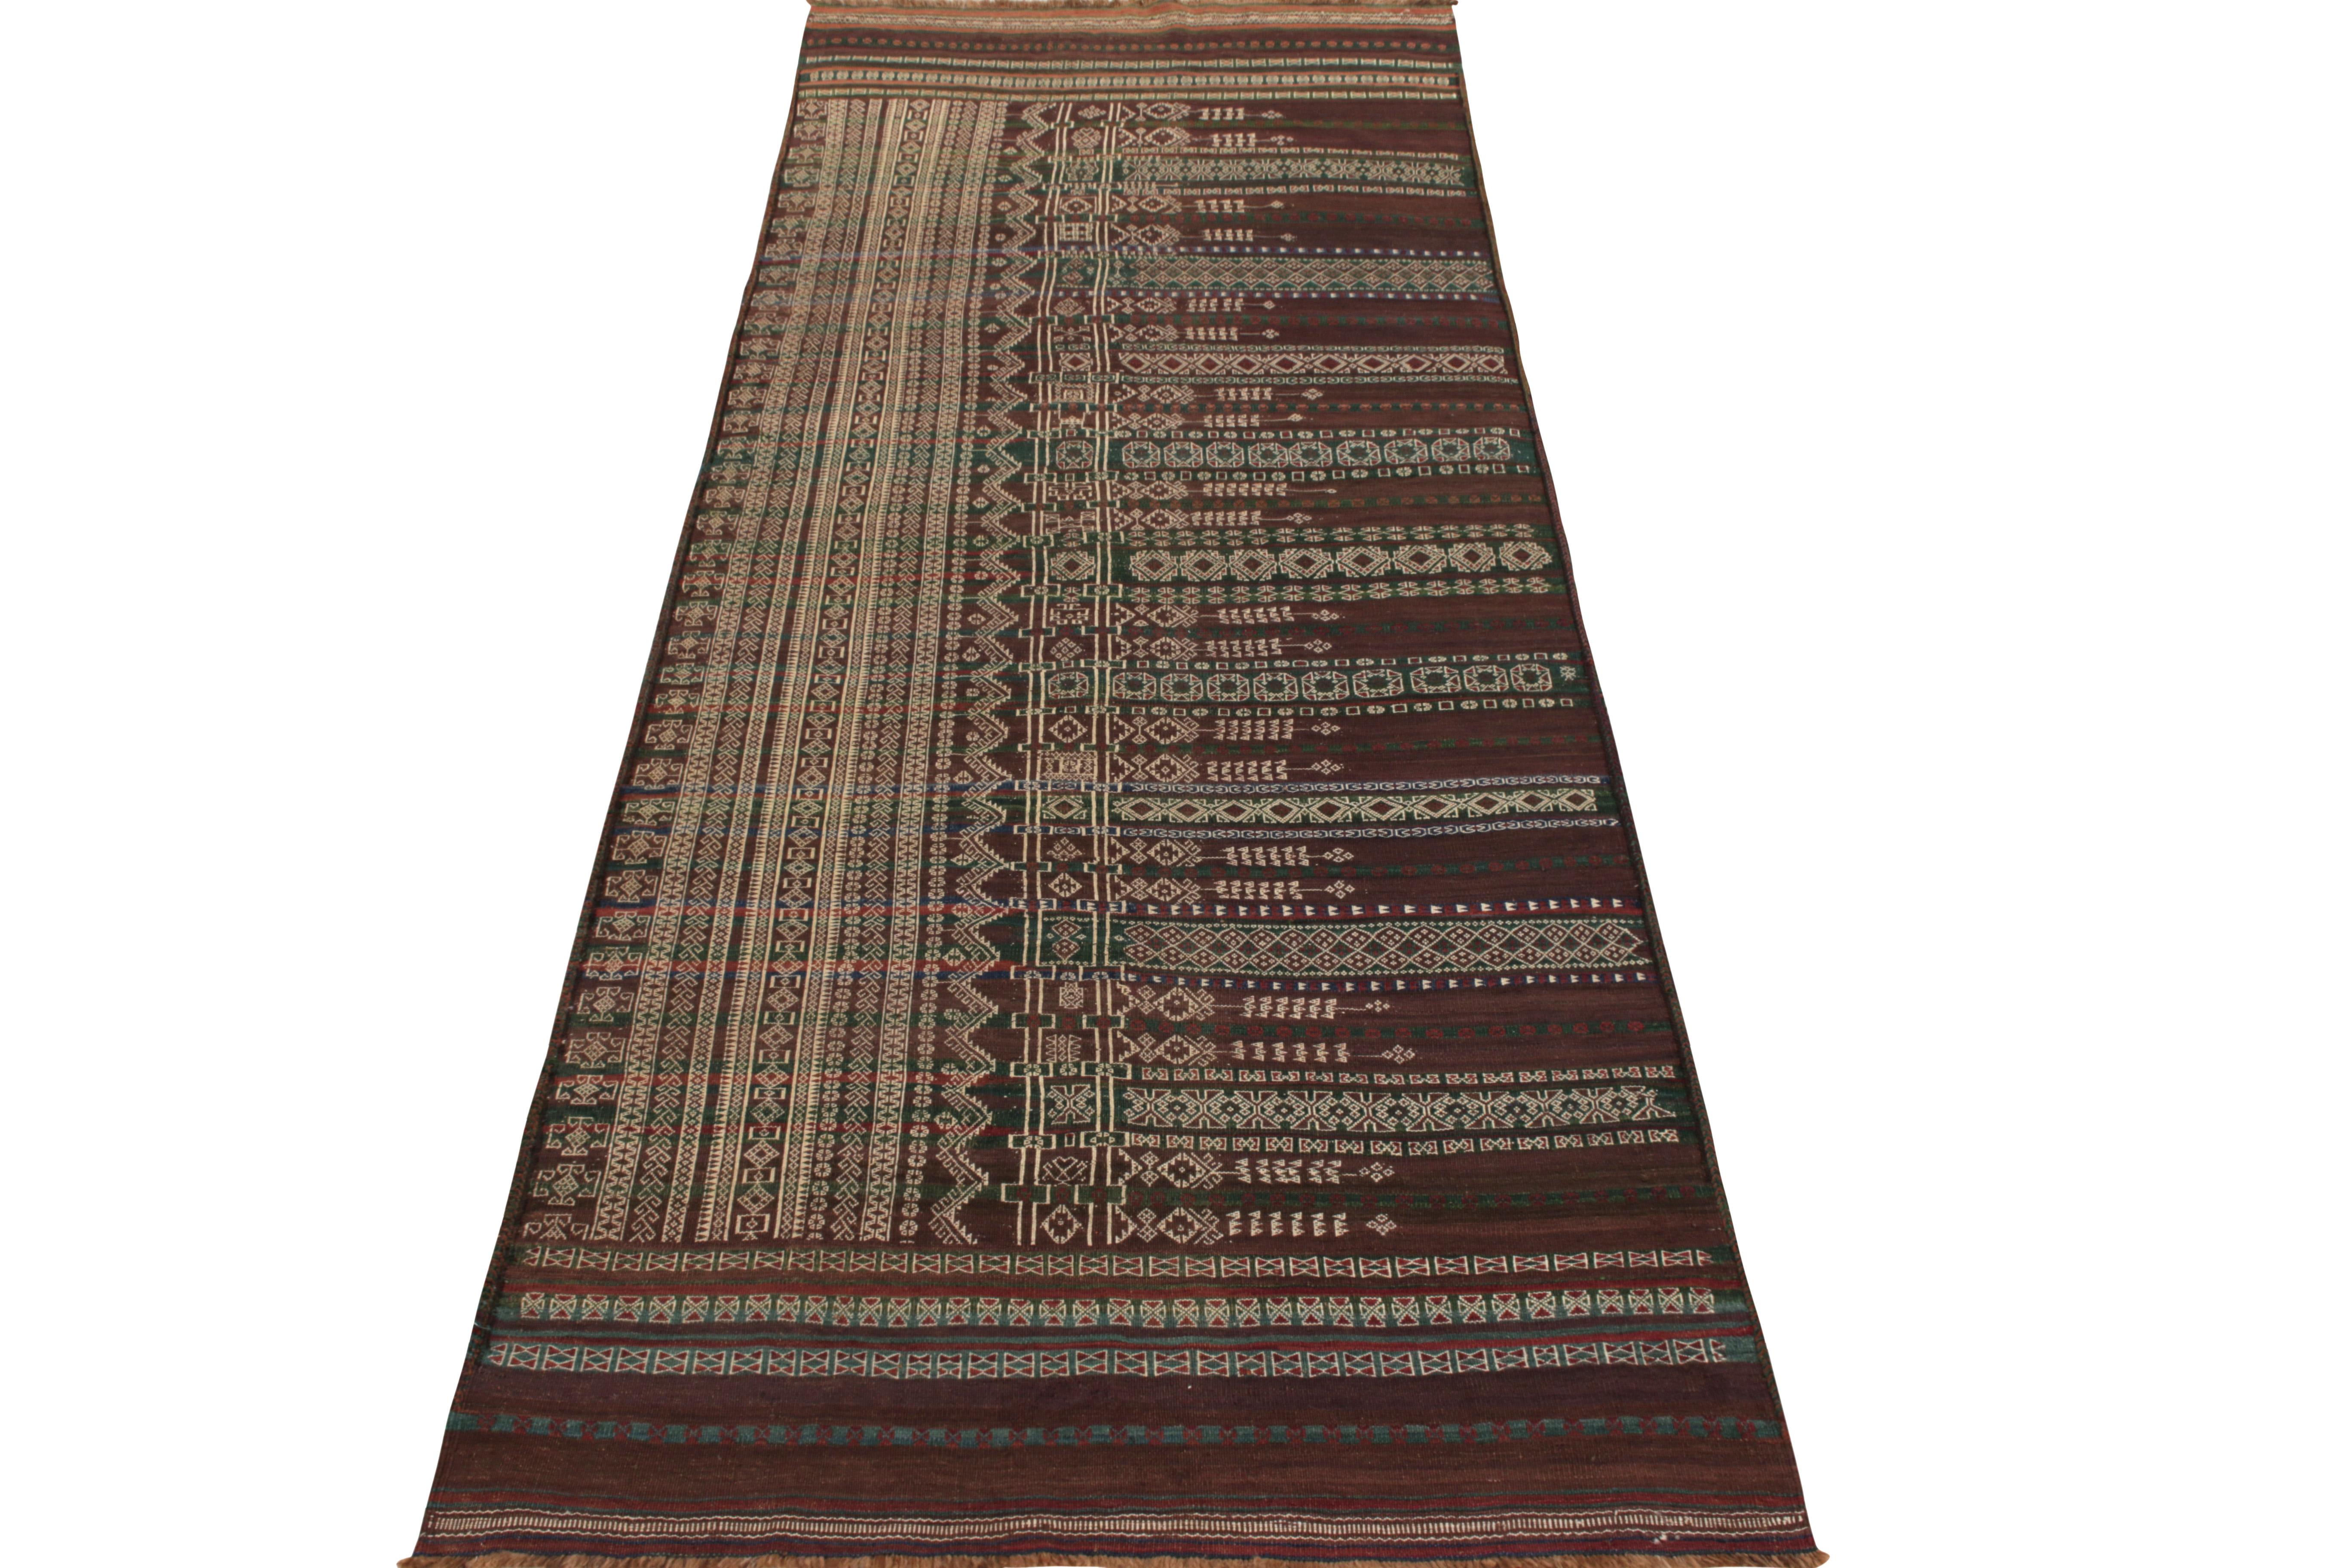 Hand woven in wool circa 1950-1960, a 4x11 vintage mid century Persian kilim rug from the Baluch lineage enjoying vibrant red, blue, and most notably green colors in such a muted, striped fashion playing fabulously with warm beige-brown hues;